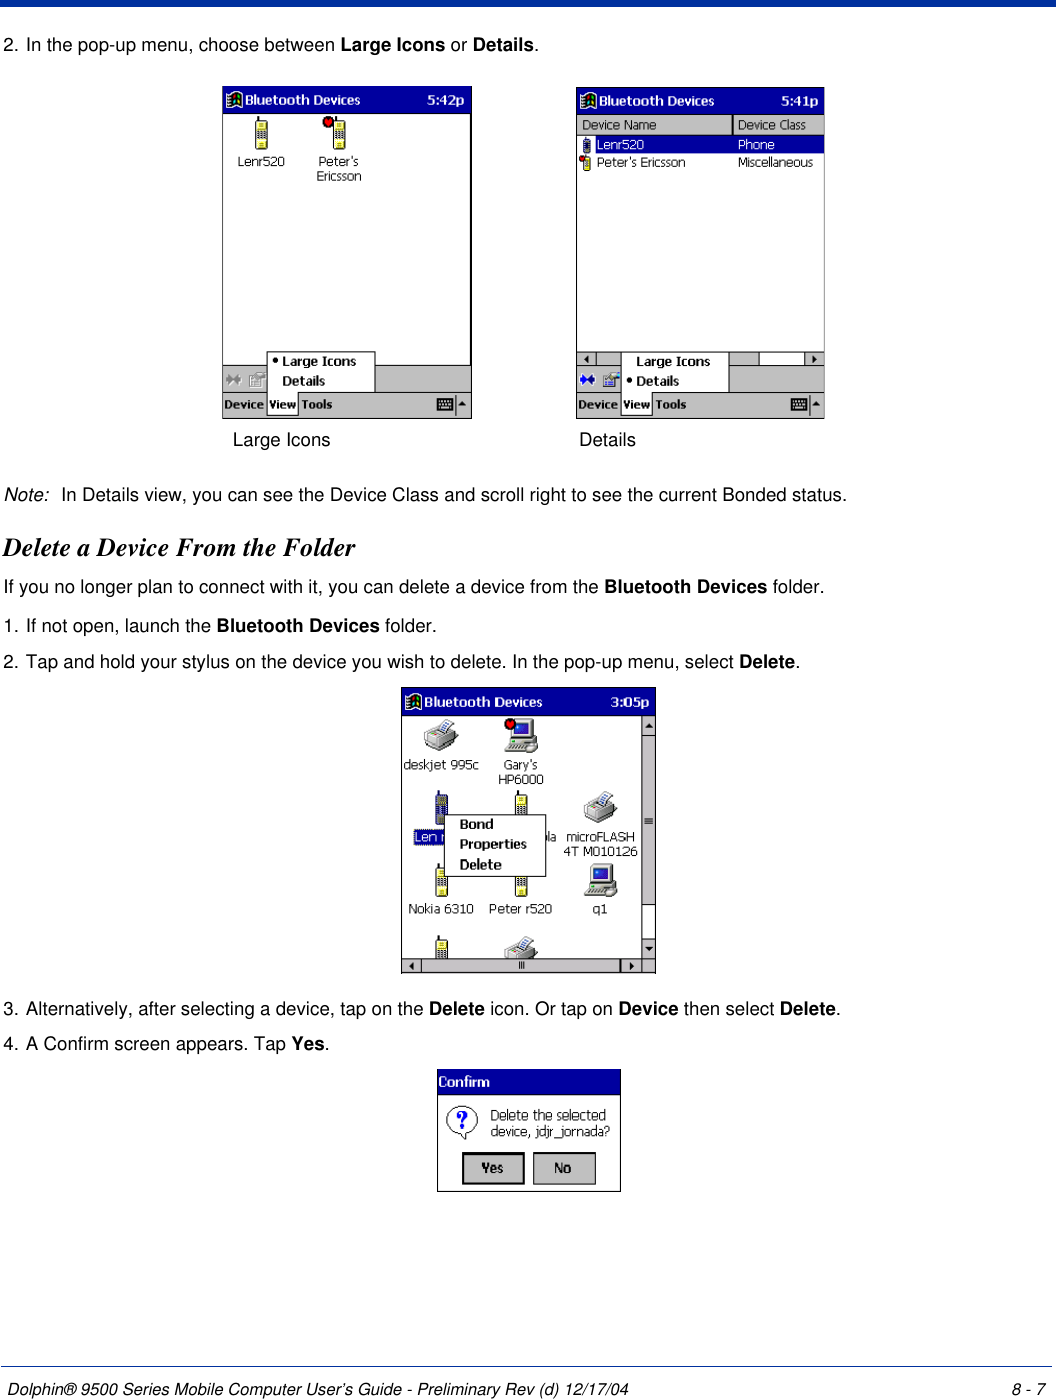 Dolphin® 9500 Series Mobile Computer User’s Guide - Preliminary Rev (d) 12/17/04 8 - 72. In the pop-up menu, choose between Large Icons or Details.Note: In Details view, you can see the Device Class and scroll right to see the current Bonded status.Delete a Device From the FolderIf you no longer plan to connect with it, you can delete a device from the Bluetooth Devices folder. 1. If not open, launch the Bluetooth Devices folder.2. Tap and hold your stylus on the device you wish to delete. In the pop-up menu, select Delete.3. Alternatively, after selecting a device, tap on the Delete icon. Or tap on Device then select Delete.4. A Confirm screen appears. Tap Yes.Large Icons Details 